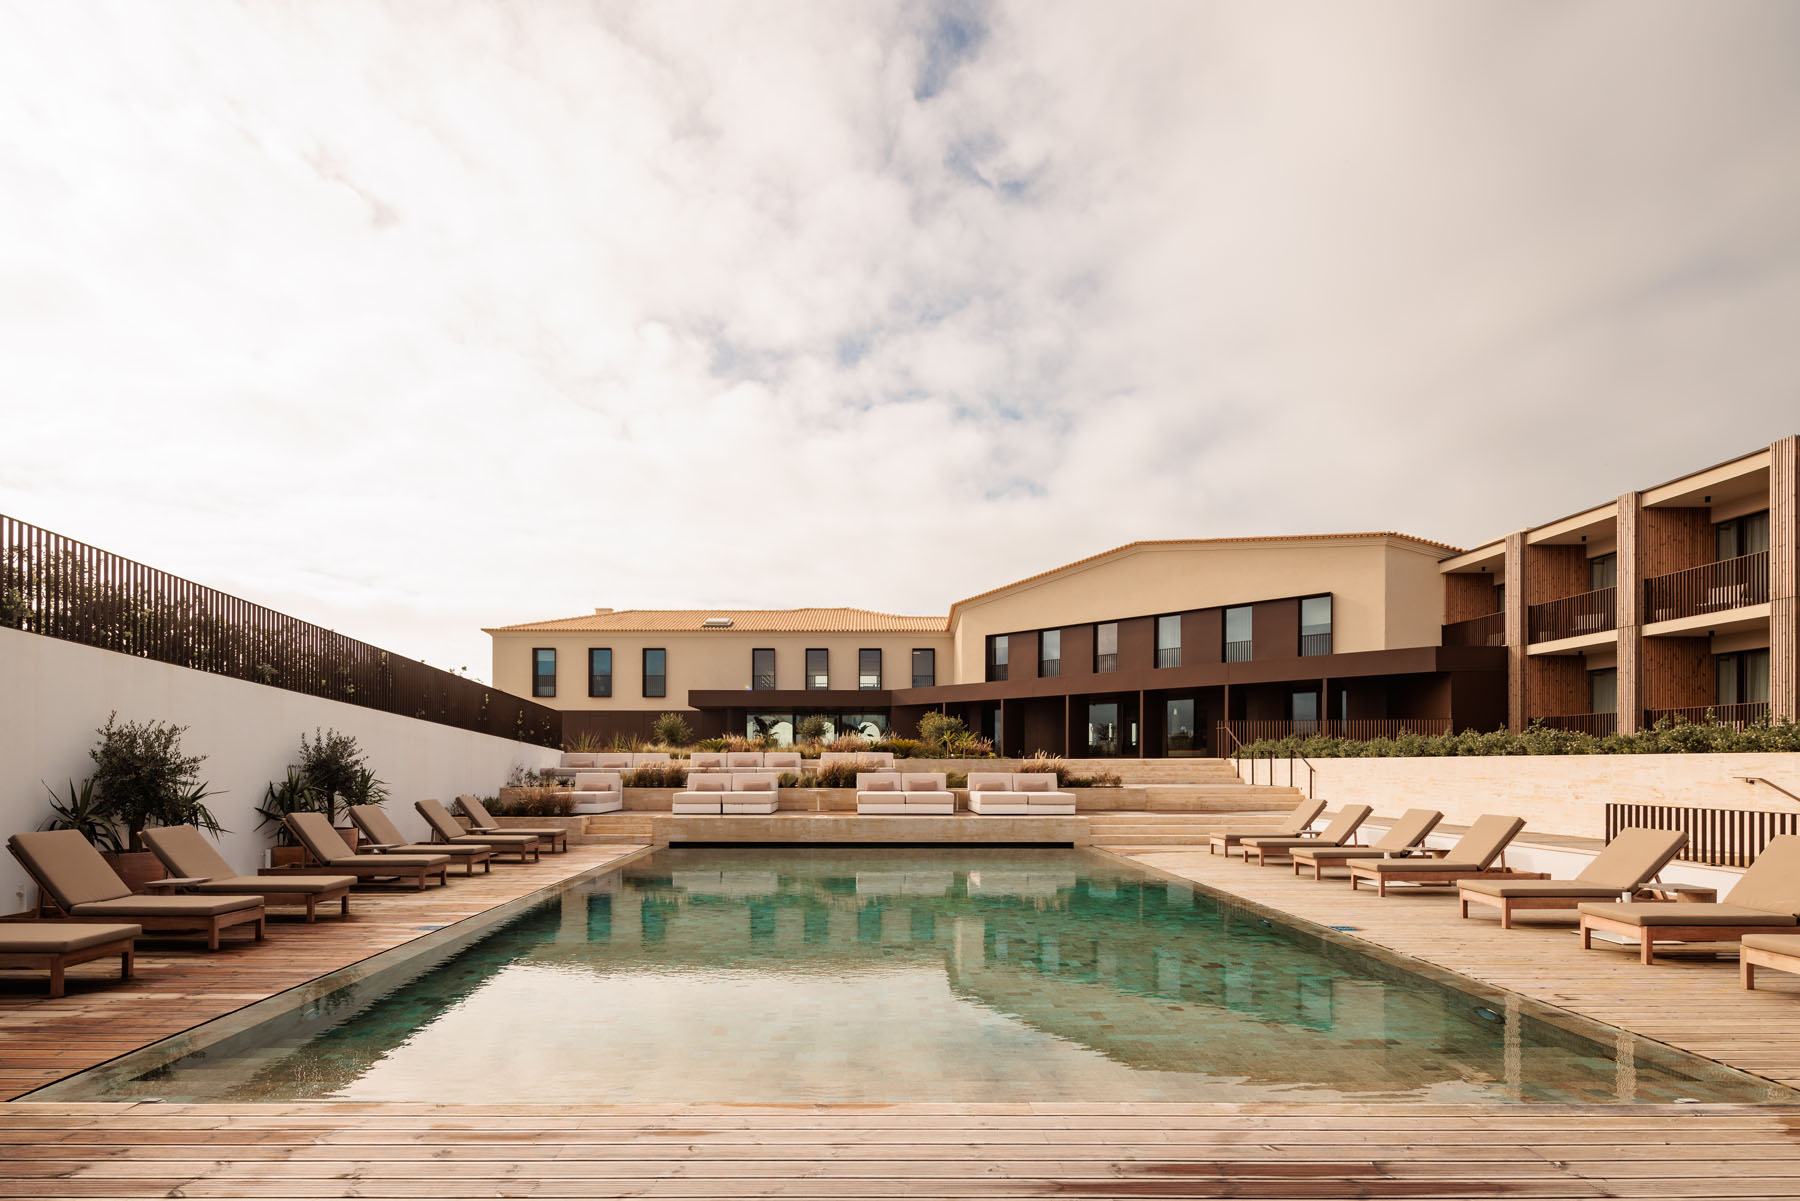 Aethos Ericeira Hotel - View of the pool area and entrance